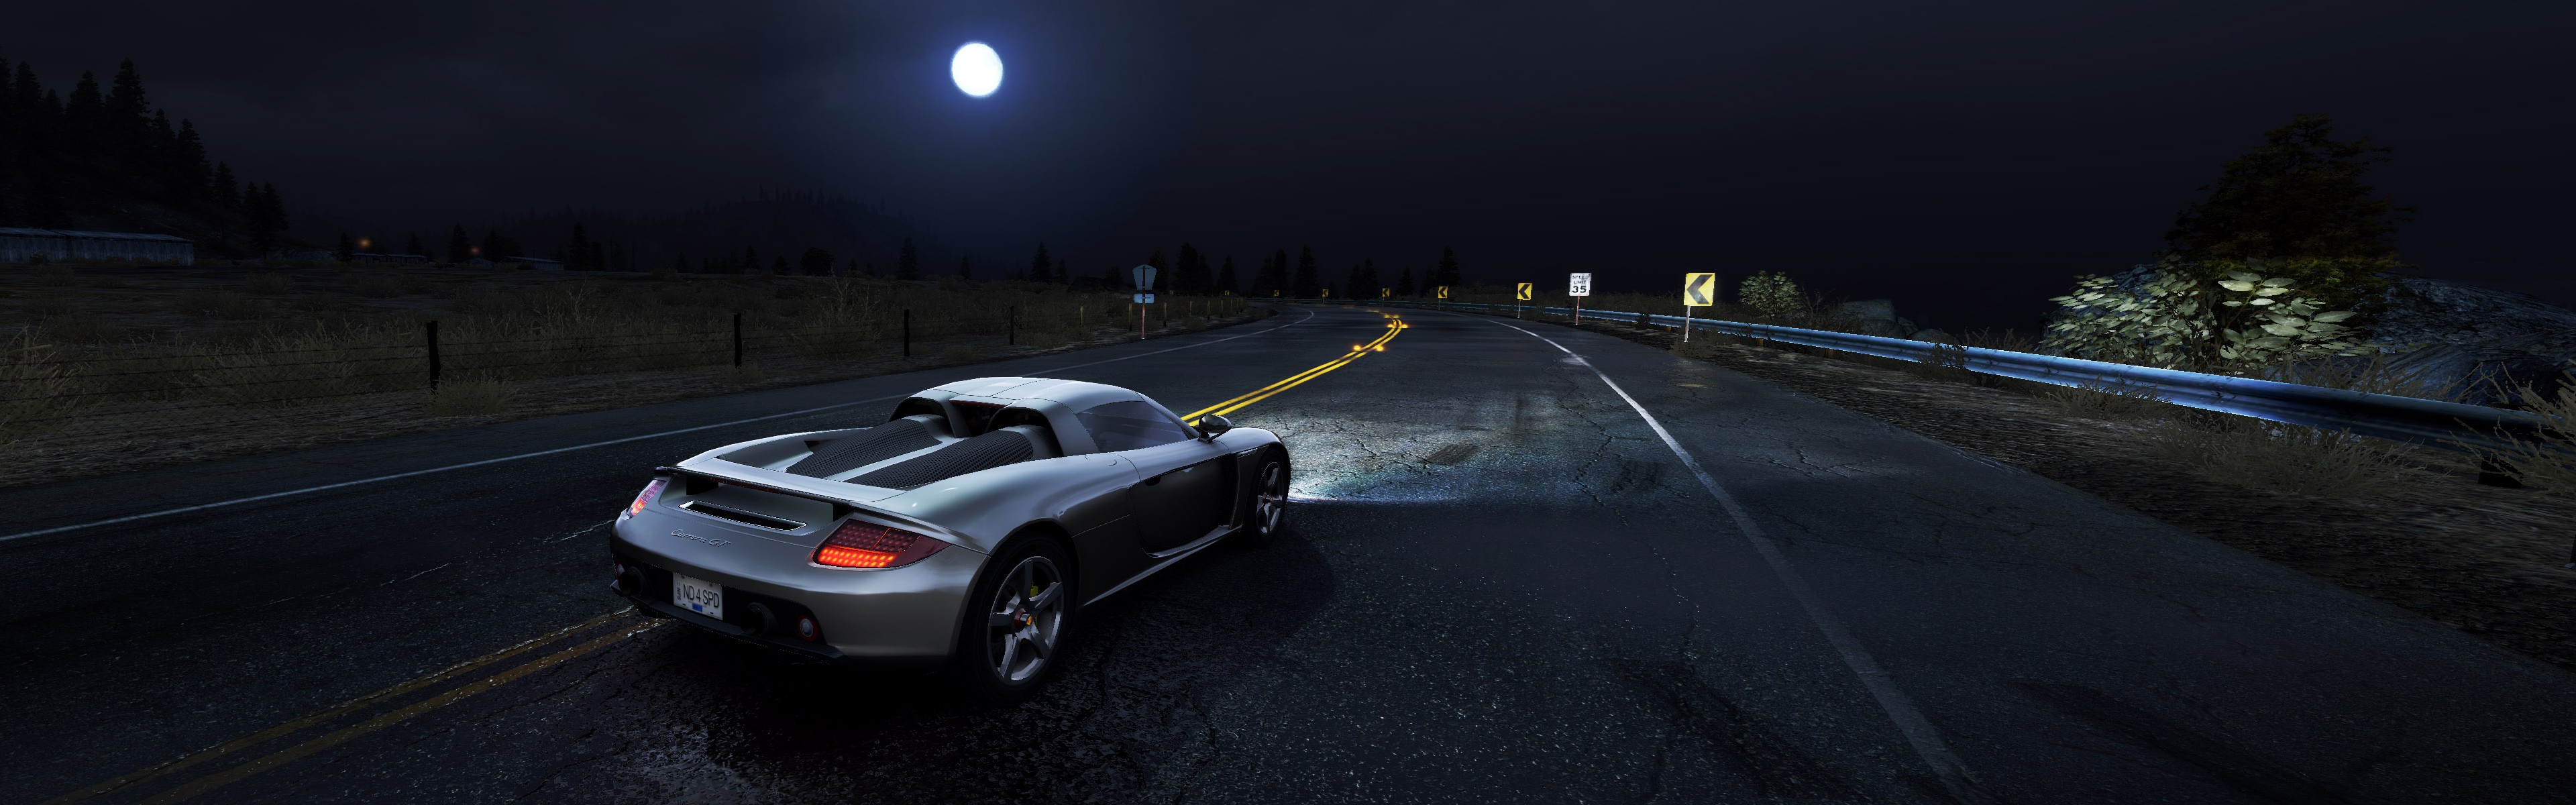 Need For Speed Hot Pursuit Car Porsche Carrera GT Night Road Video Games Multiple Display Need For S 3840x1200